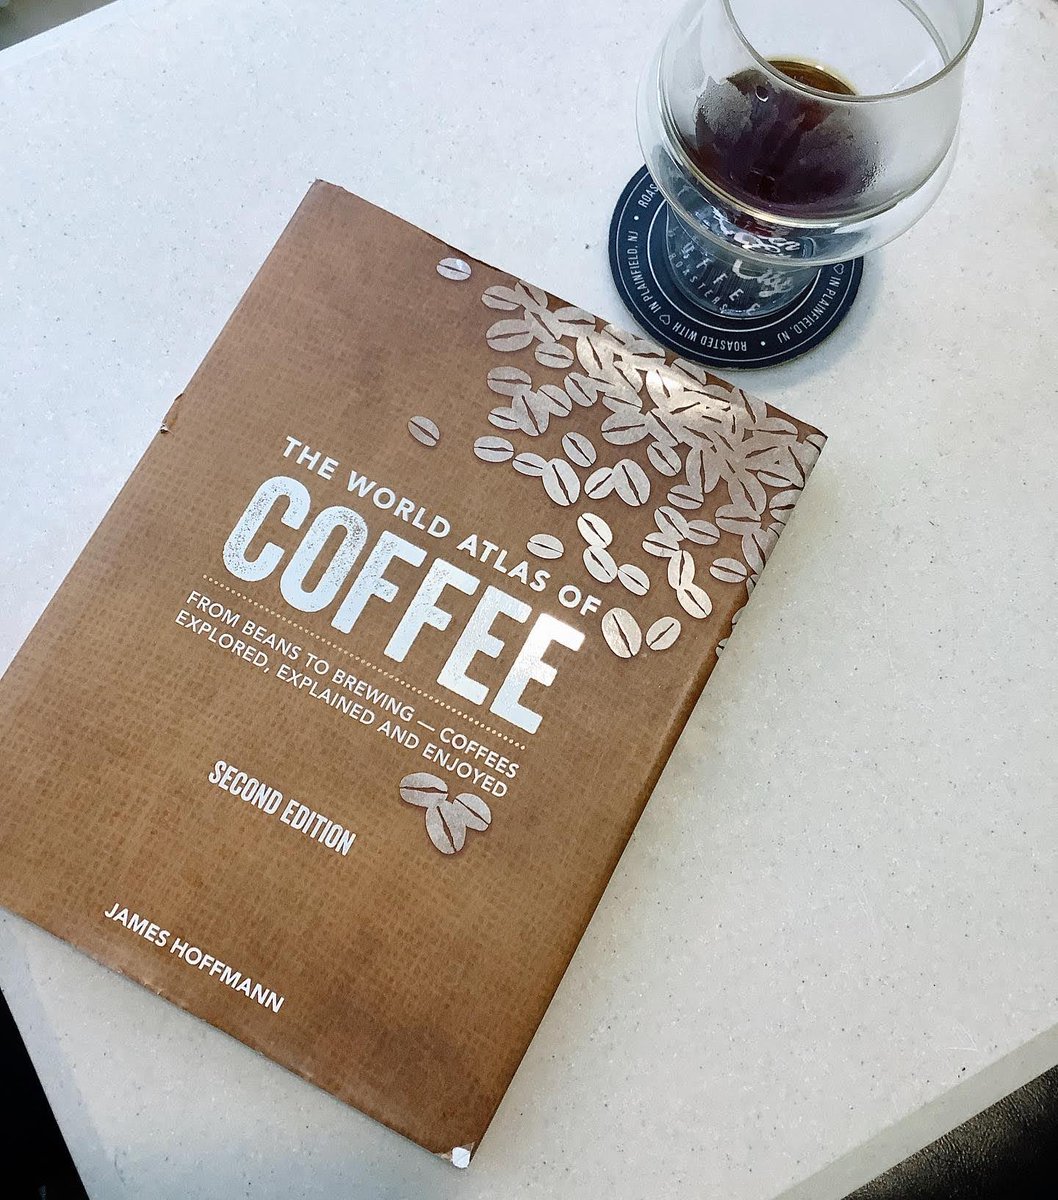 To G99d reads and Great coffee over at Brew Coffee Bar

#brewciffeebar #matawannj #craftcoffee